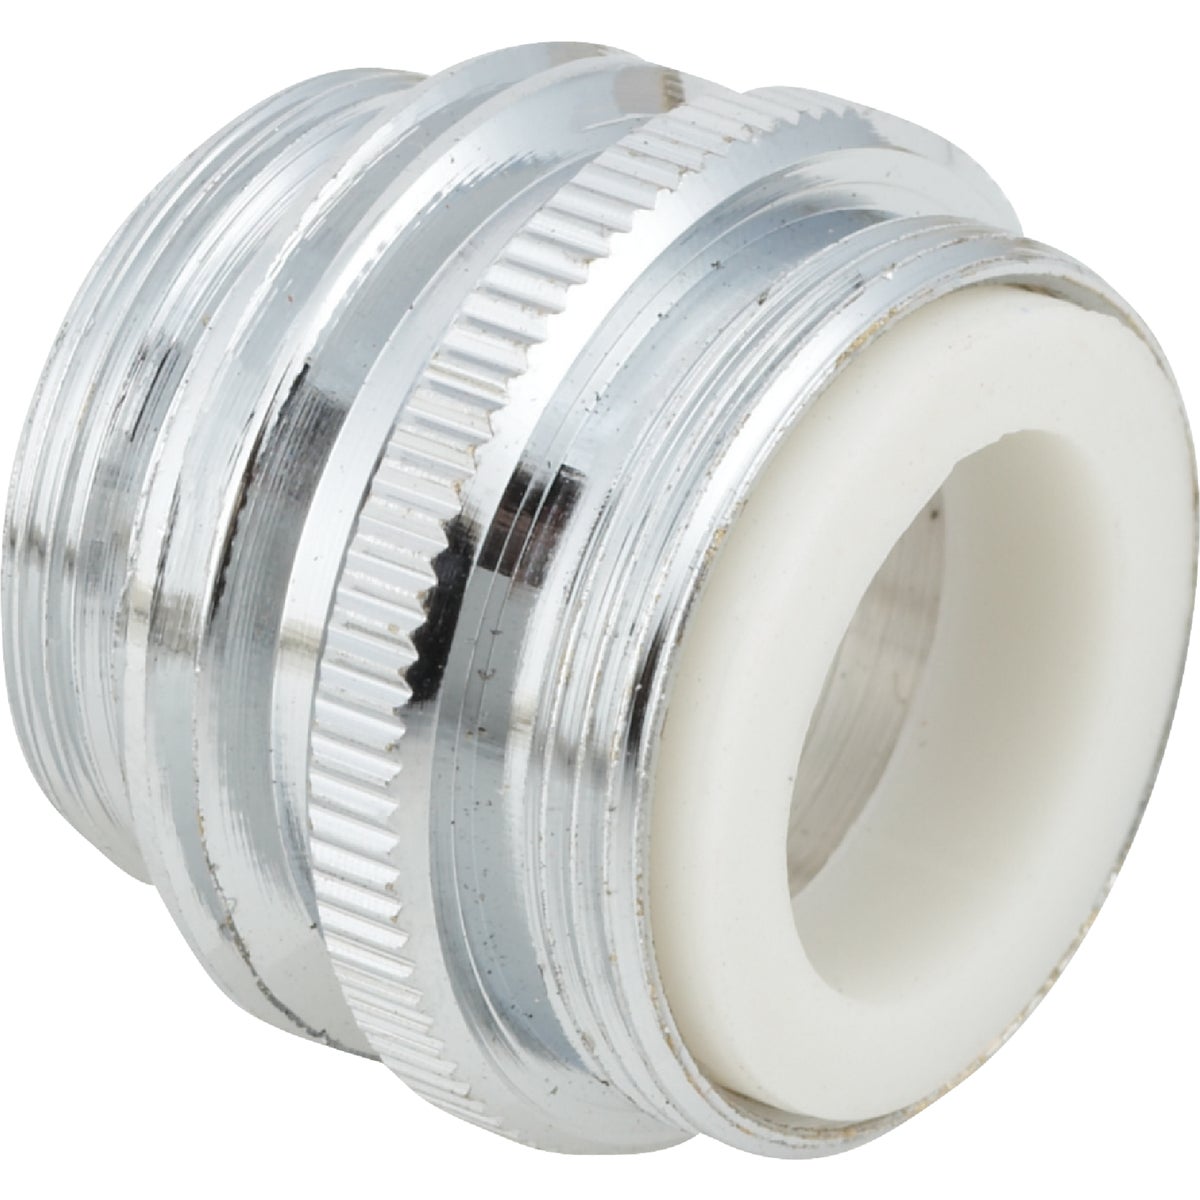 Do it 15/16" Outside or 55/64" Inside to 3/4" Dual Thread Faucet Adapter, Low Lead